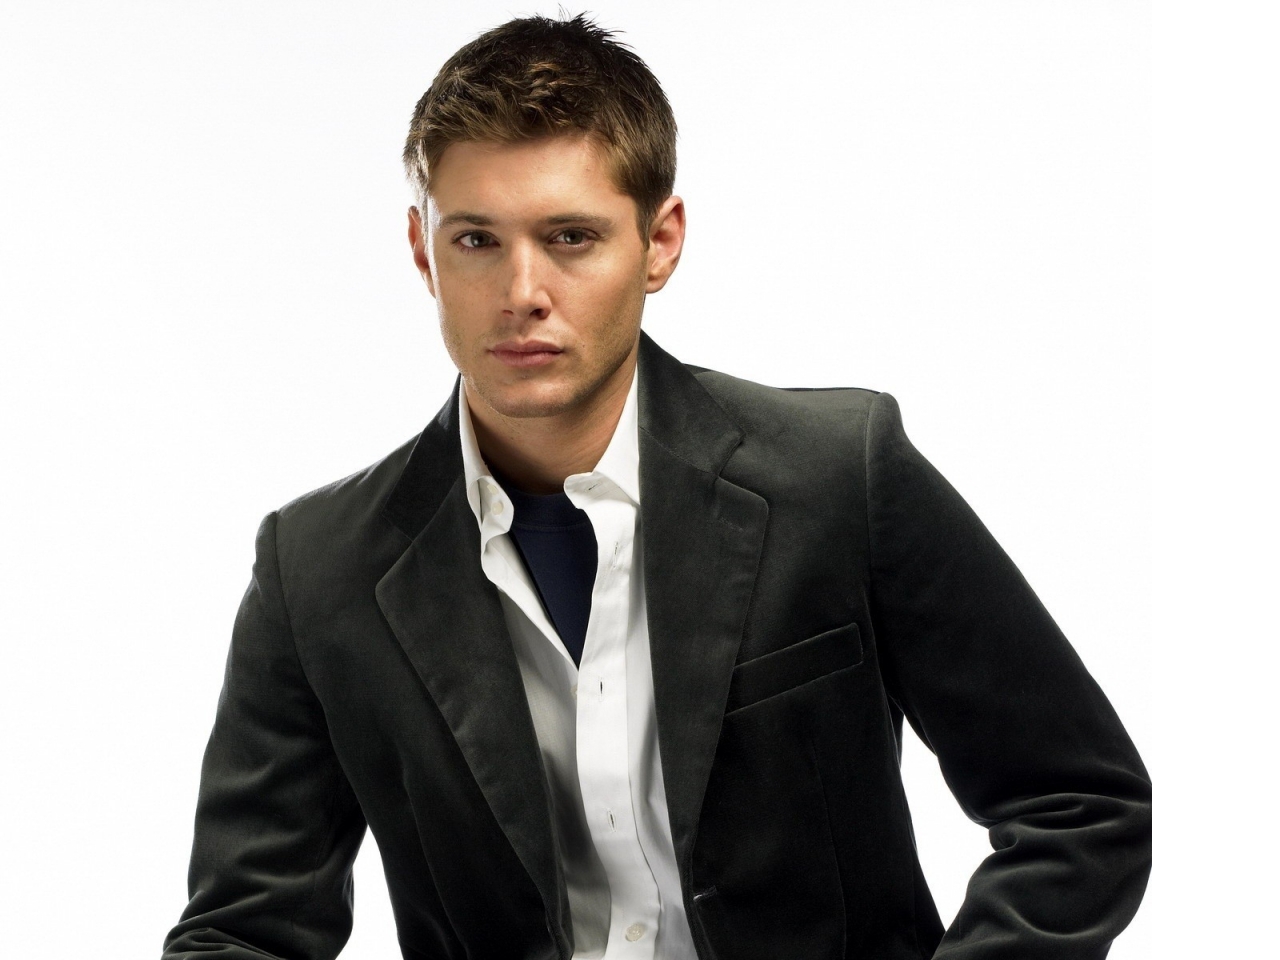 Cool Jensen Ackles for 1280 x 960 resolution